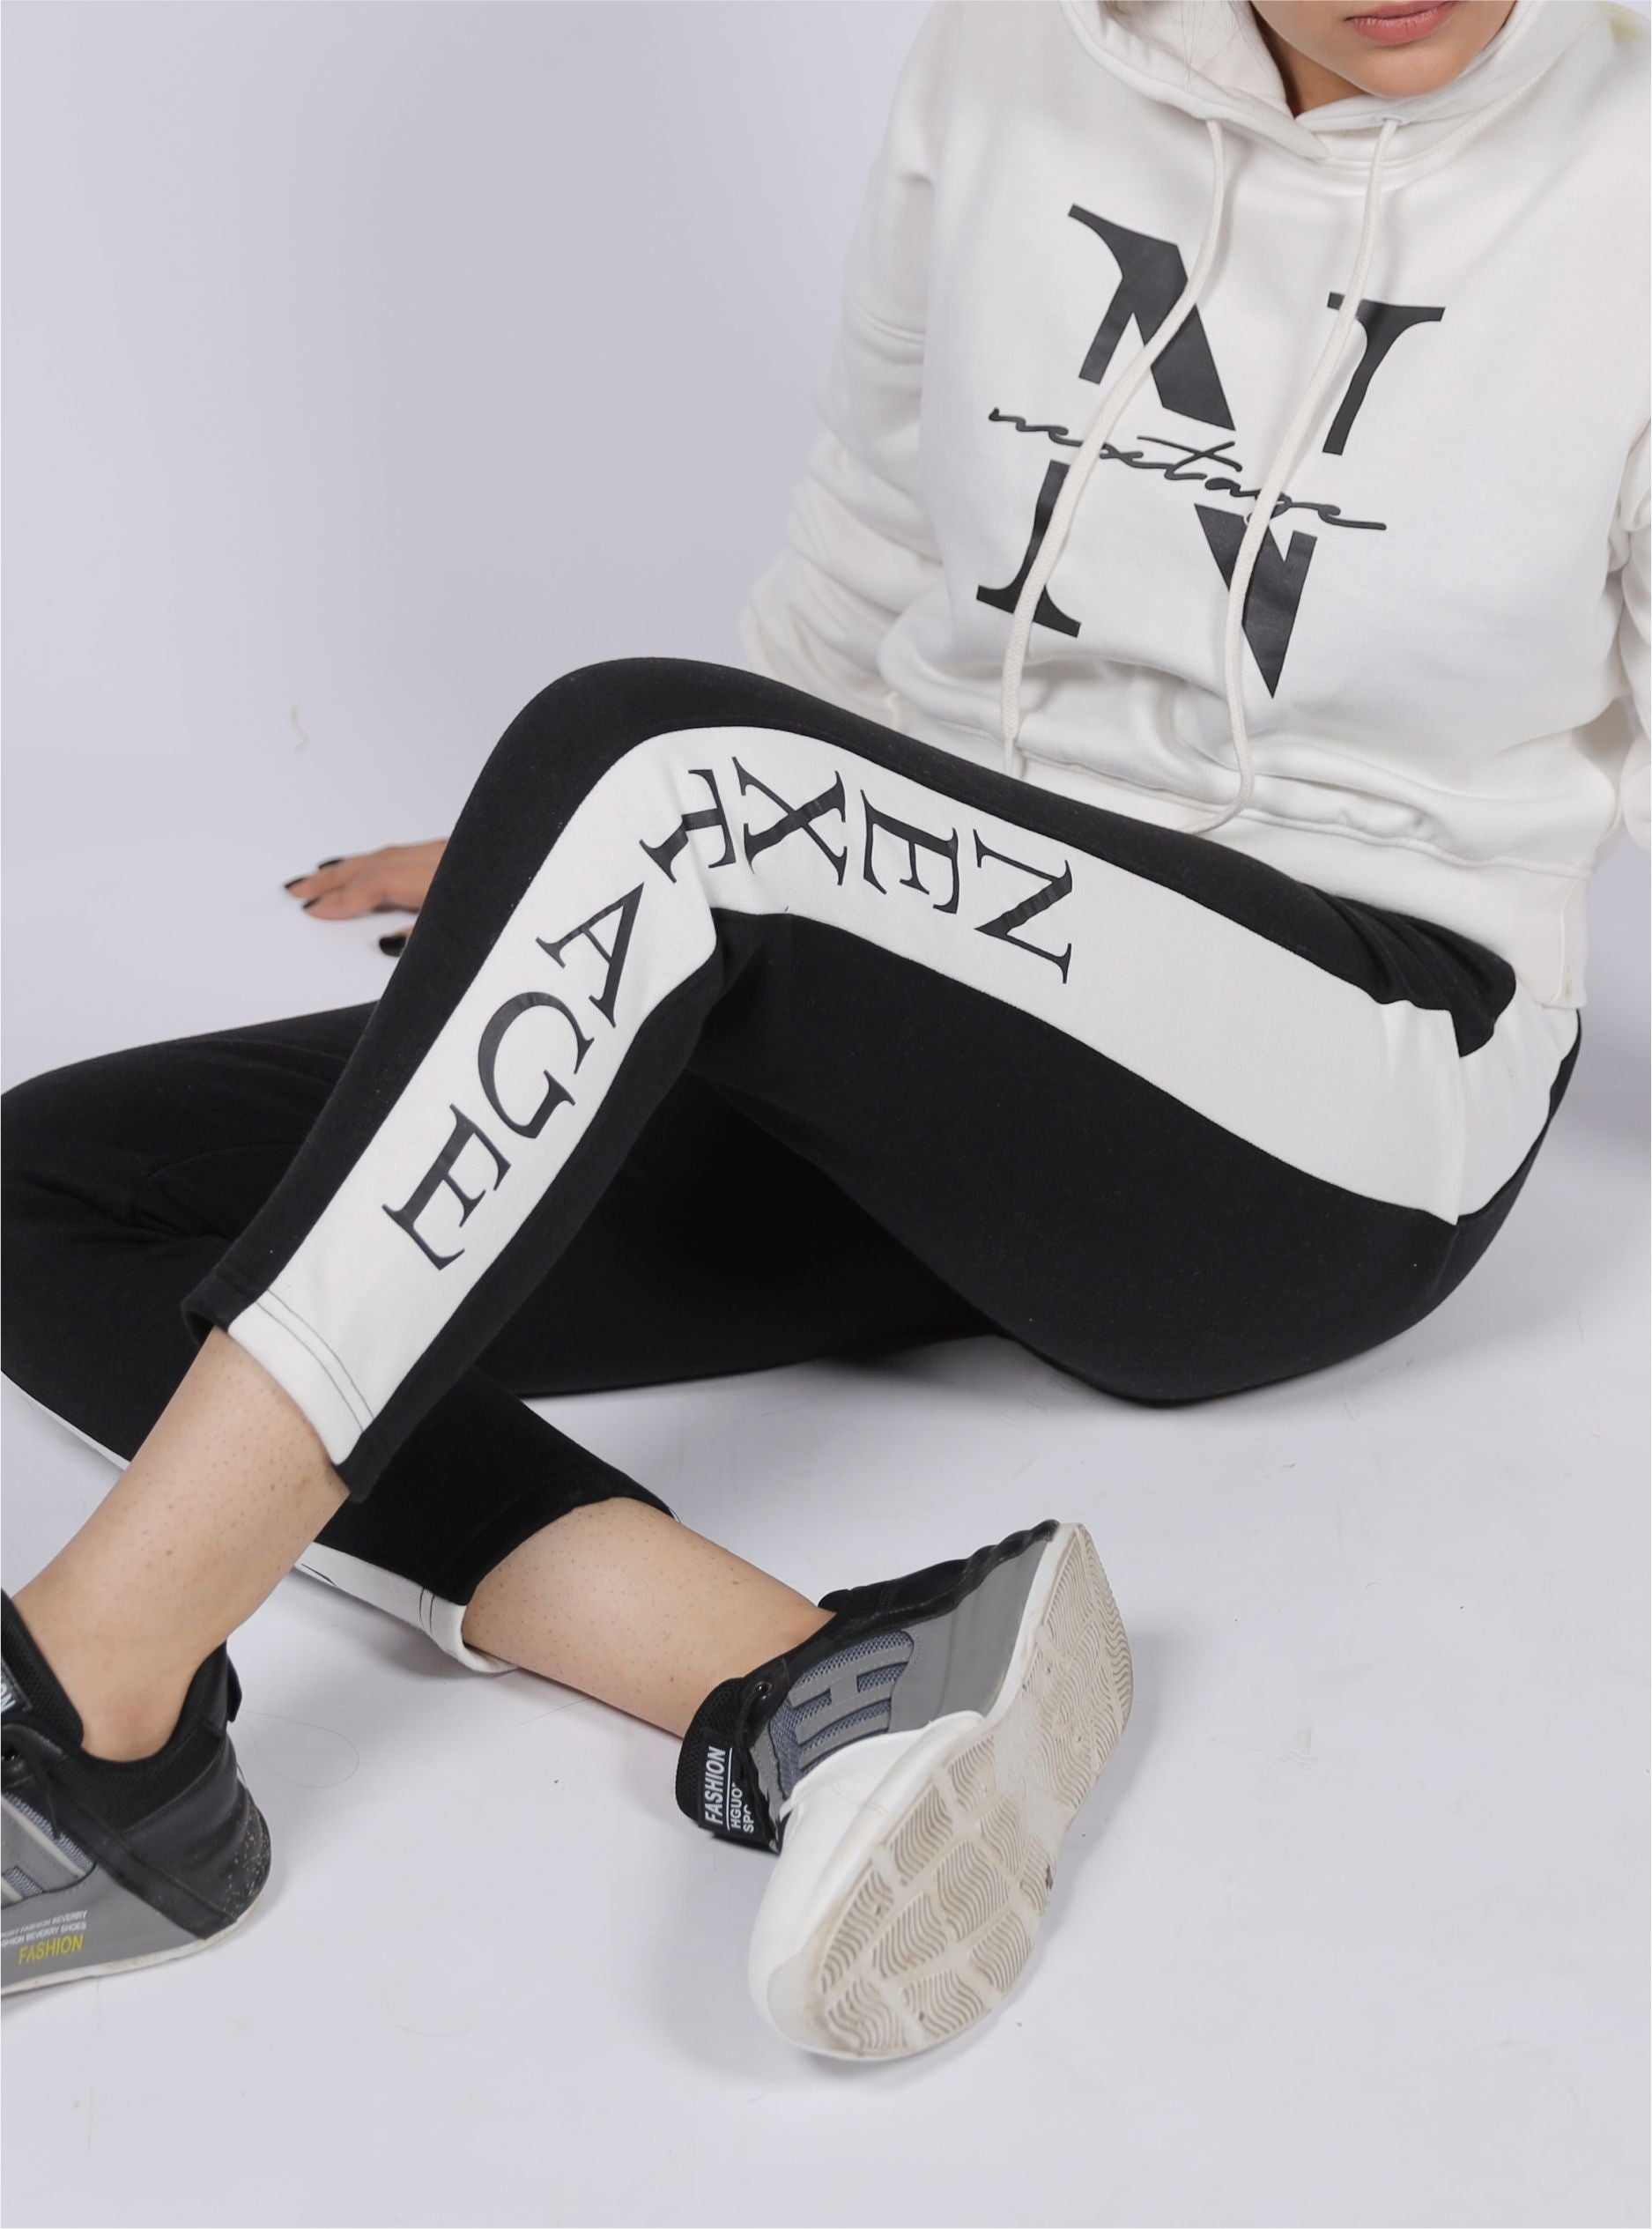 tracksuit for ladies in pakistan,